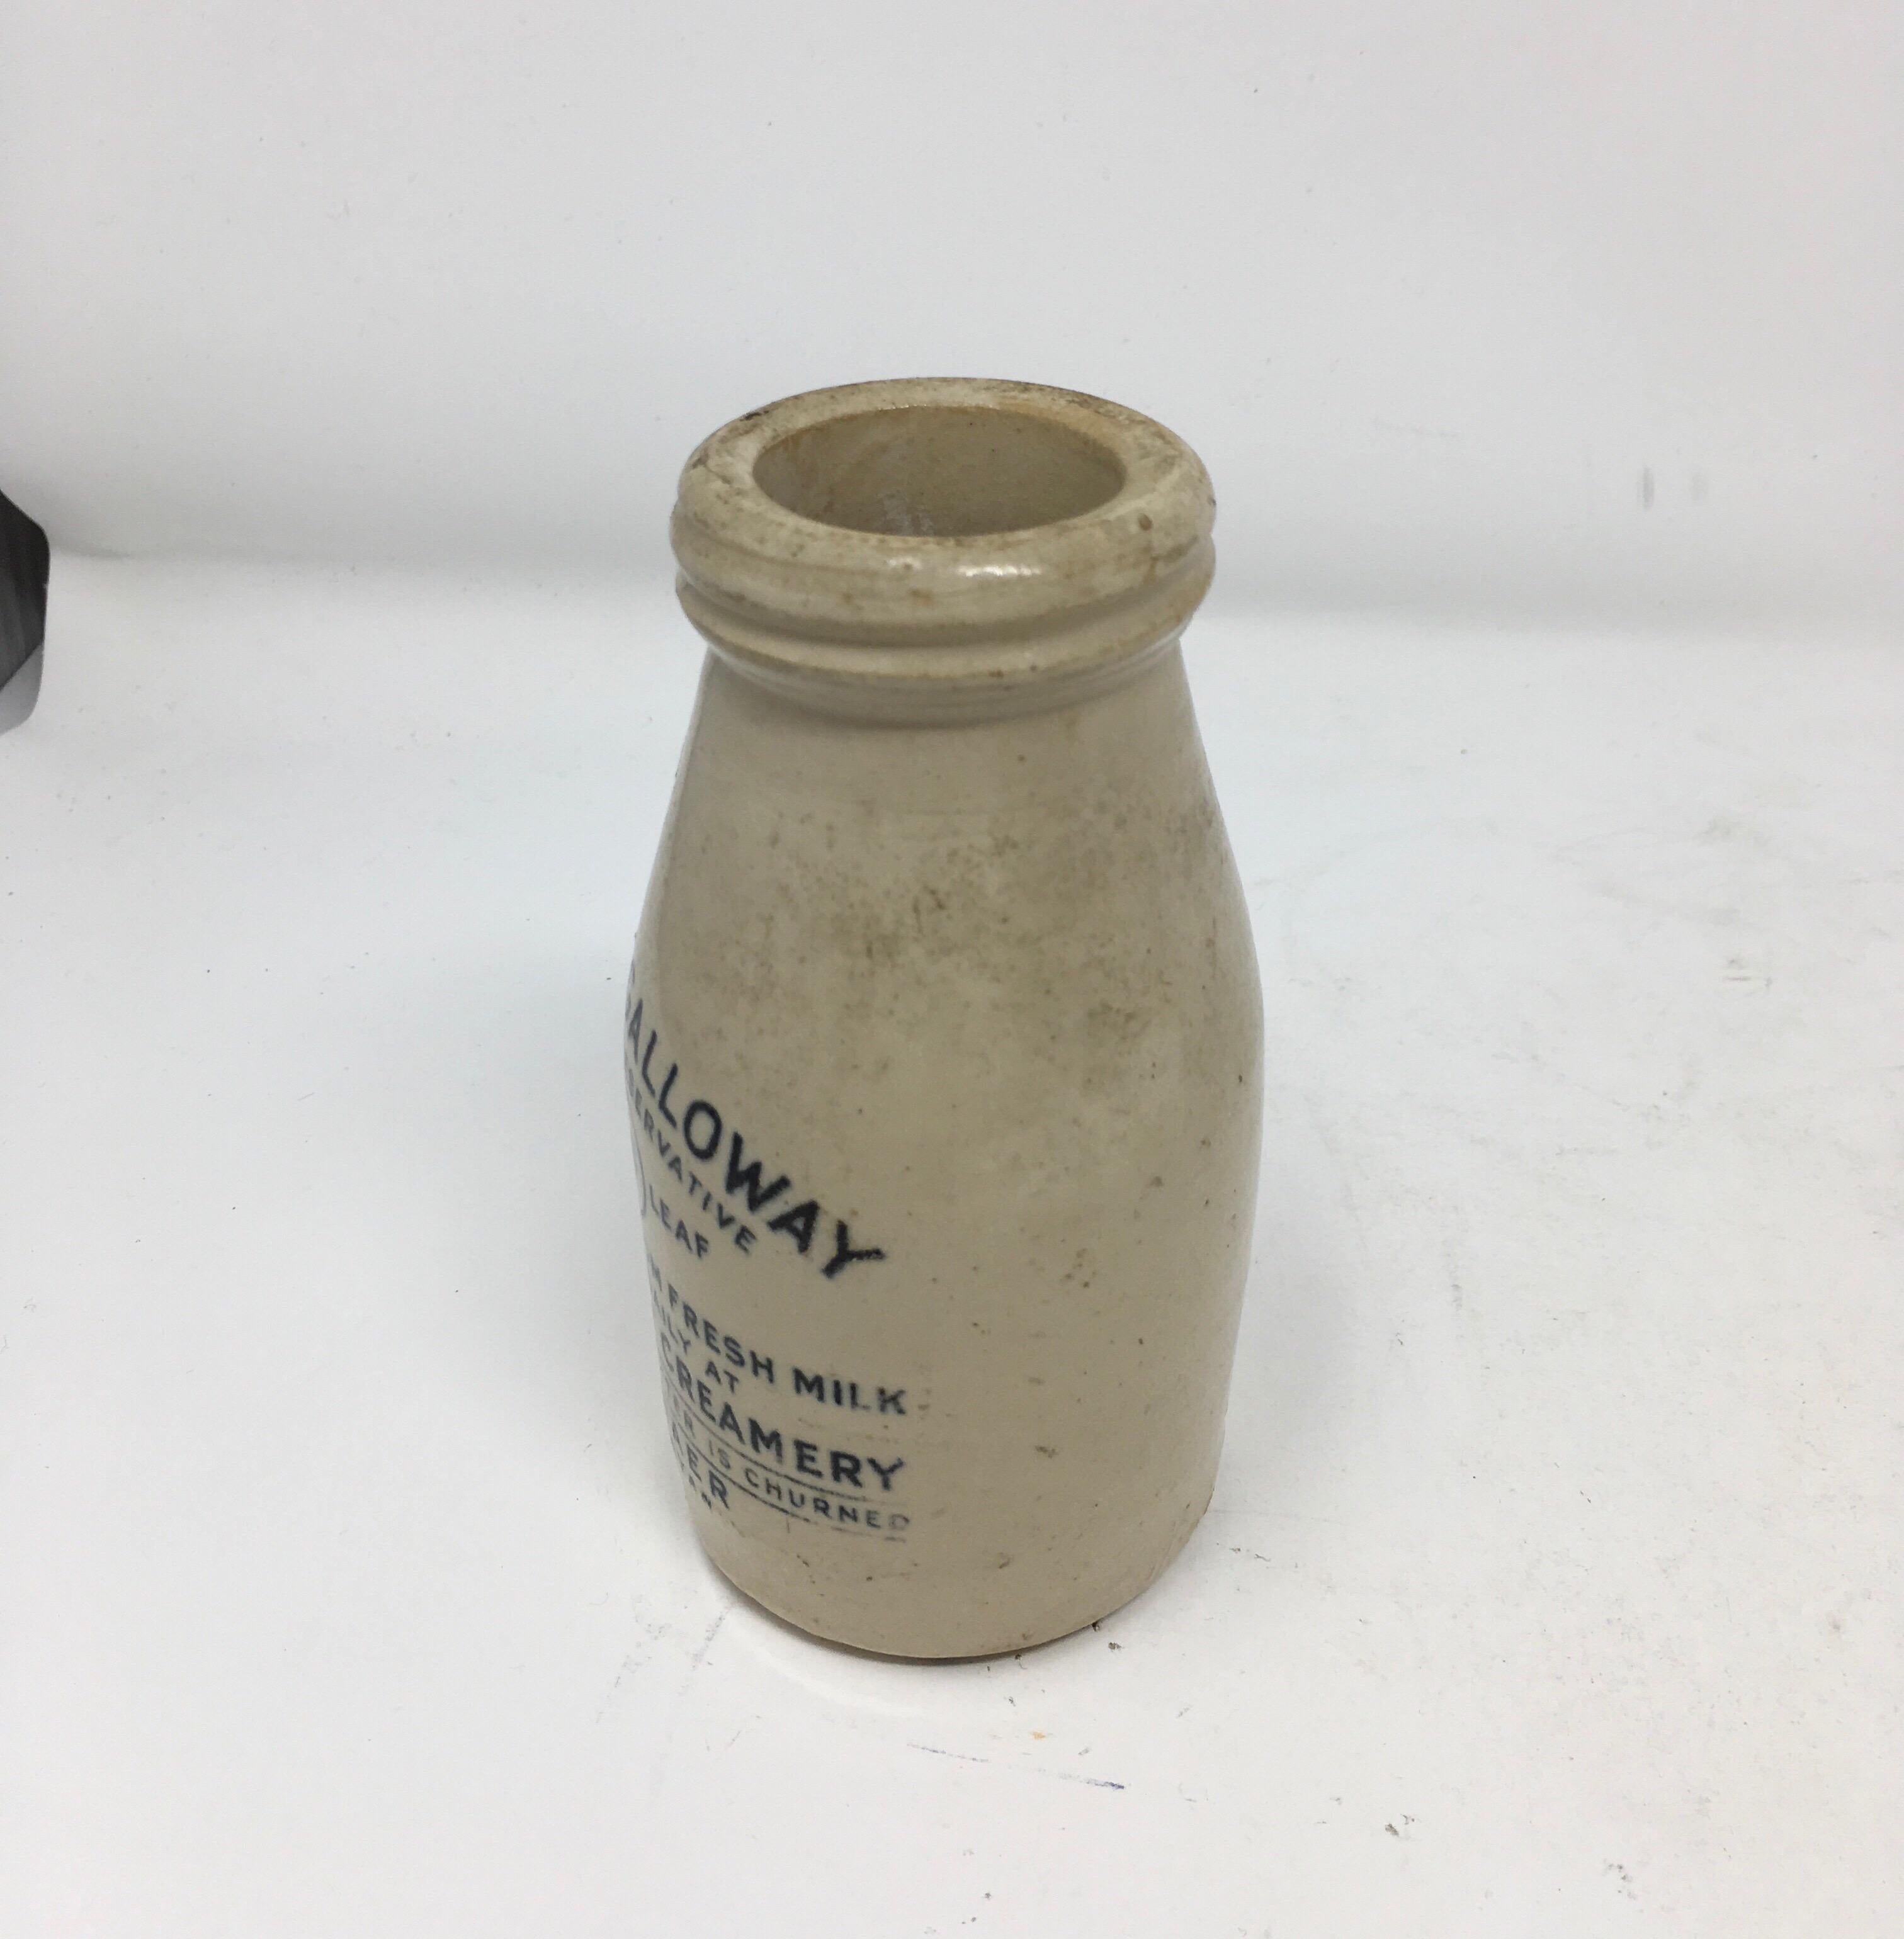 Found in England, this vintage Galloway preserved cream ironstone advertising jar from Scotland is in good clean condition. The decorative pot has transfer on the front in black lettering under the glaze and has the company's logo, Cream O'Galloway